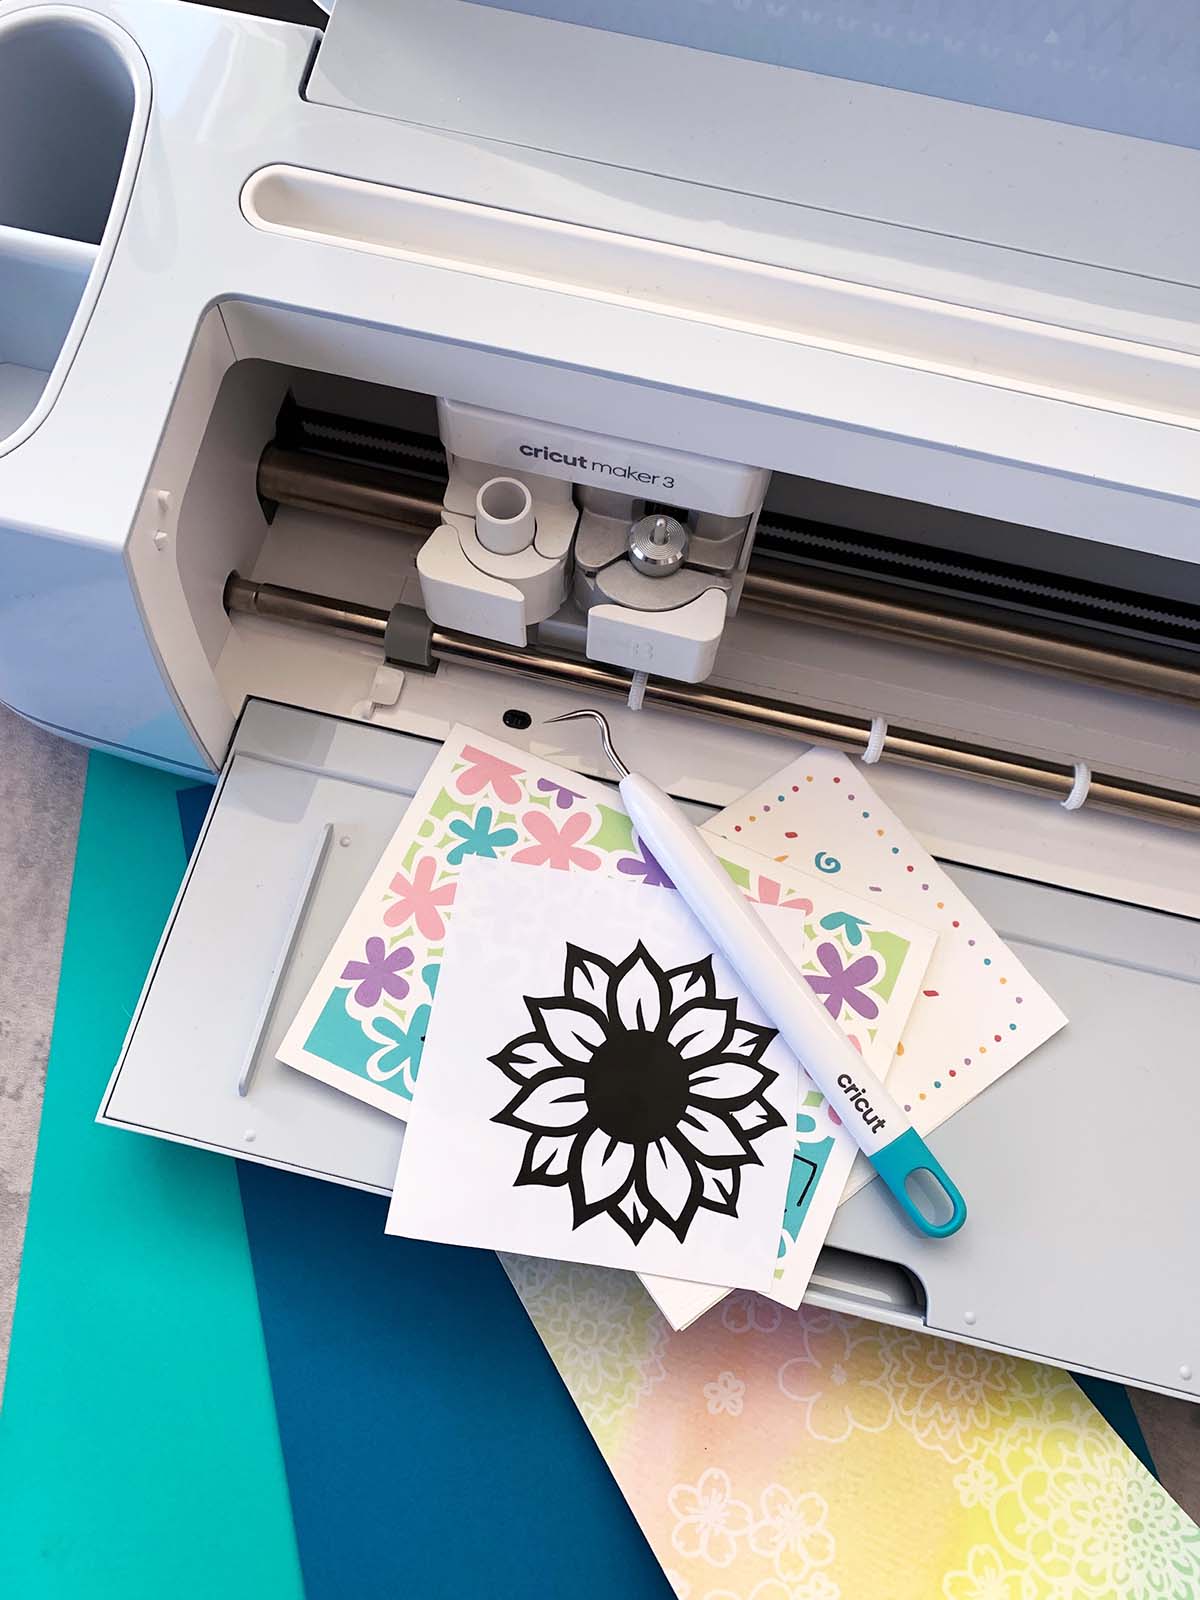 Select your materials to create unique Cricut Projects